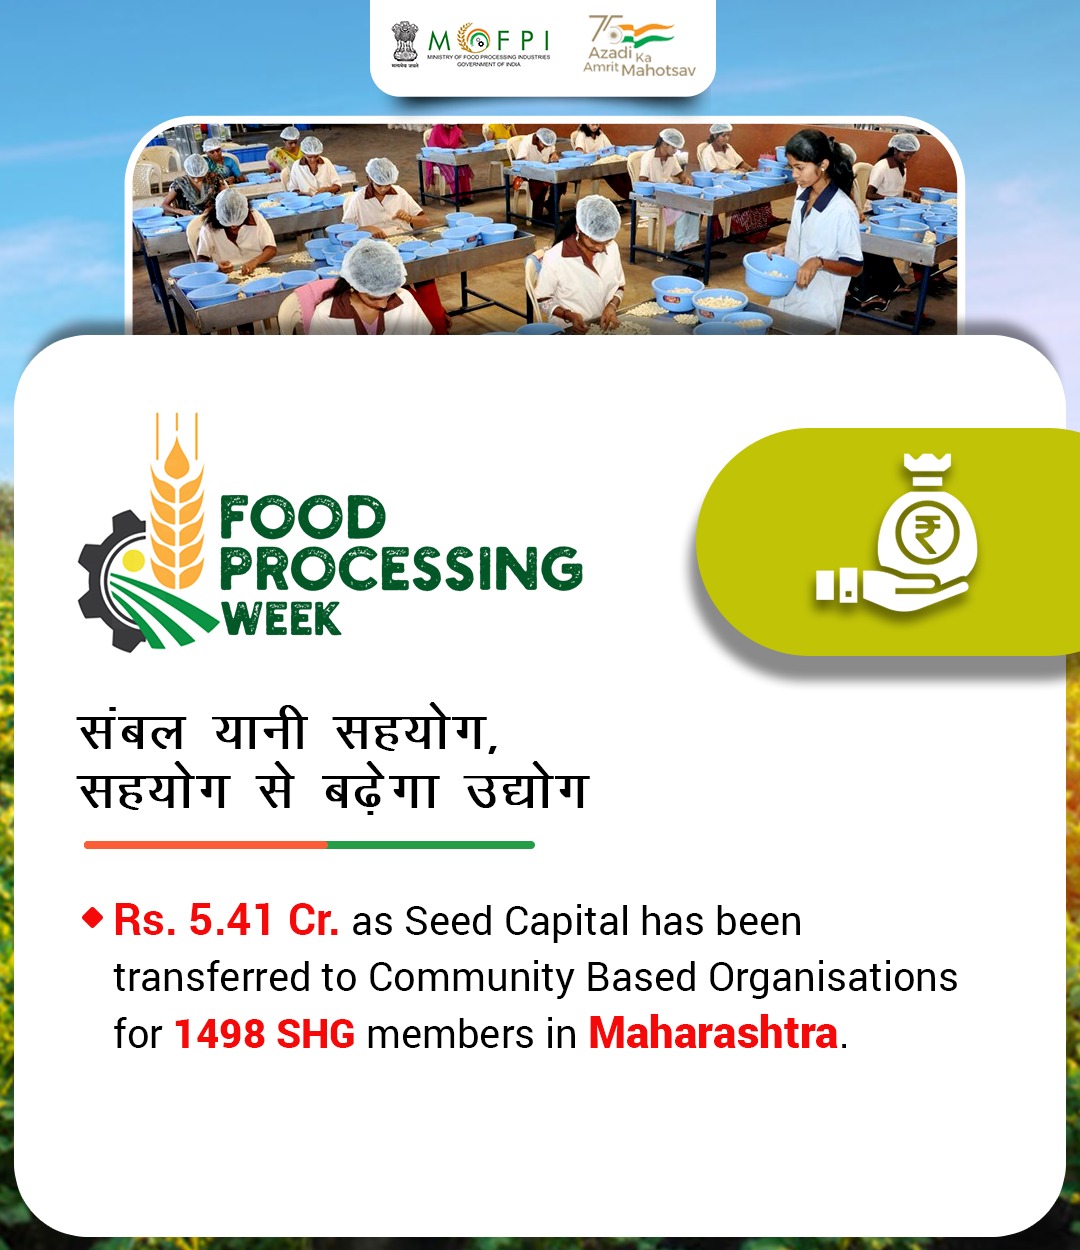 Food Processing Week - Release of Seed Capital in Maharashtra